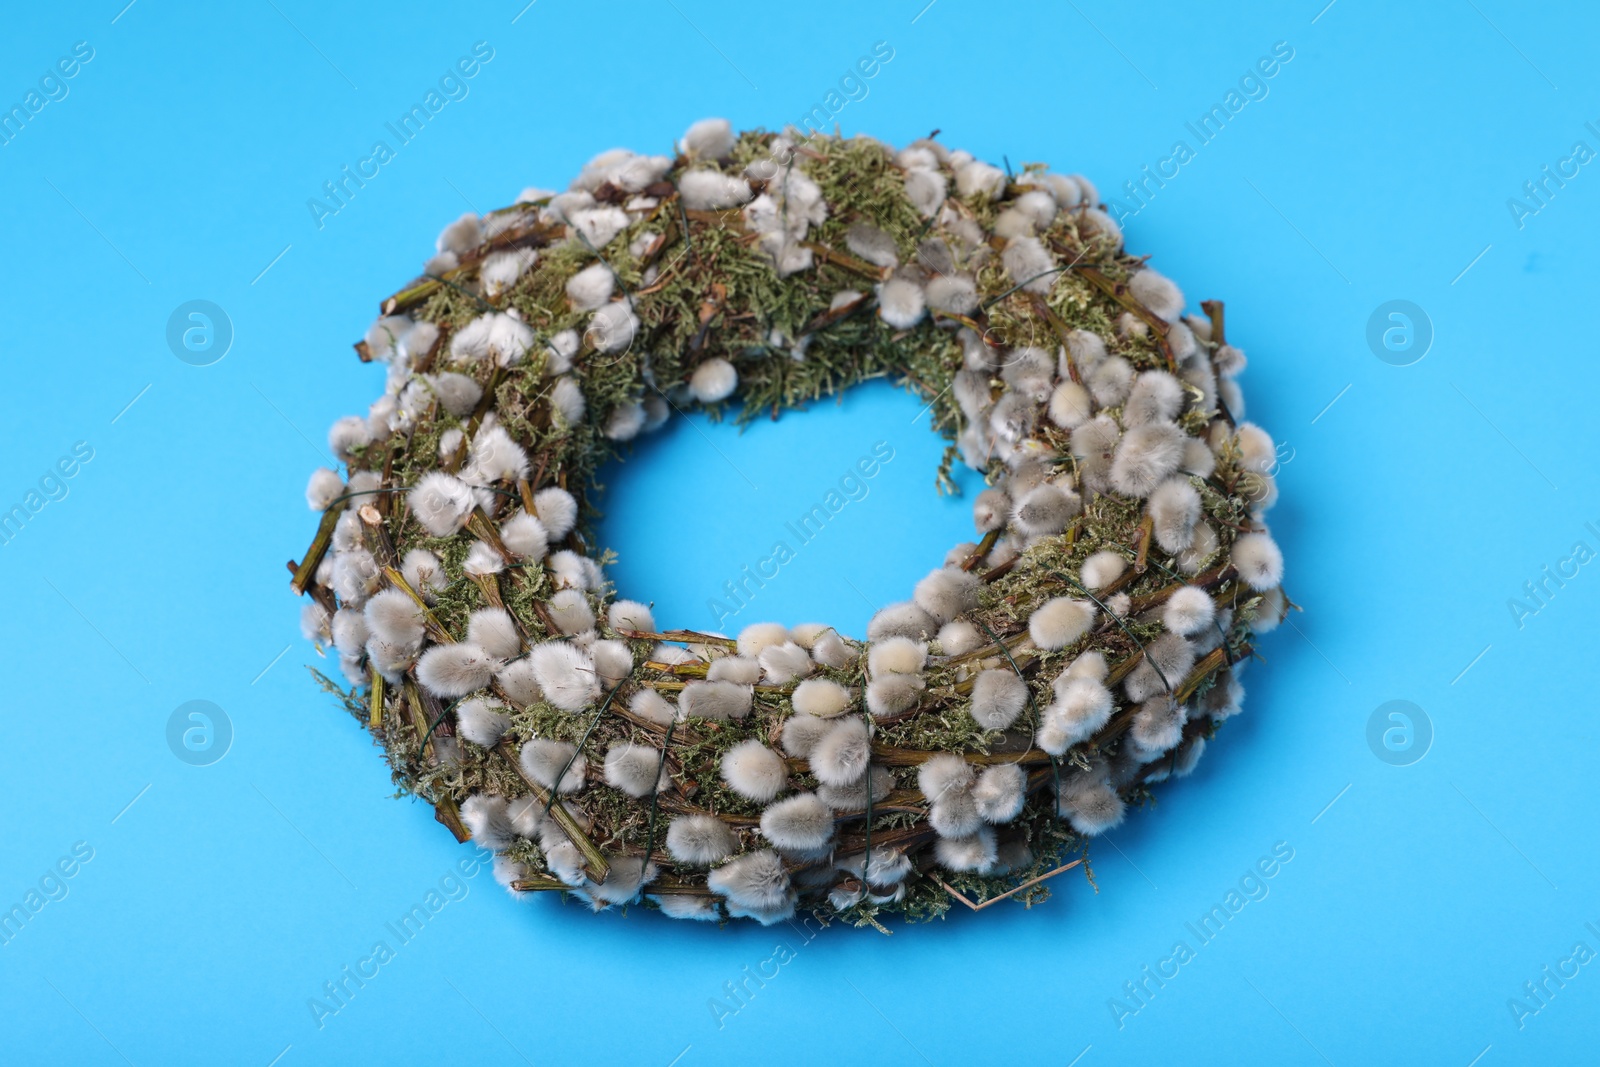 Photo of Wreath made of beautiful willow flowers on light blue background